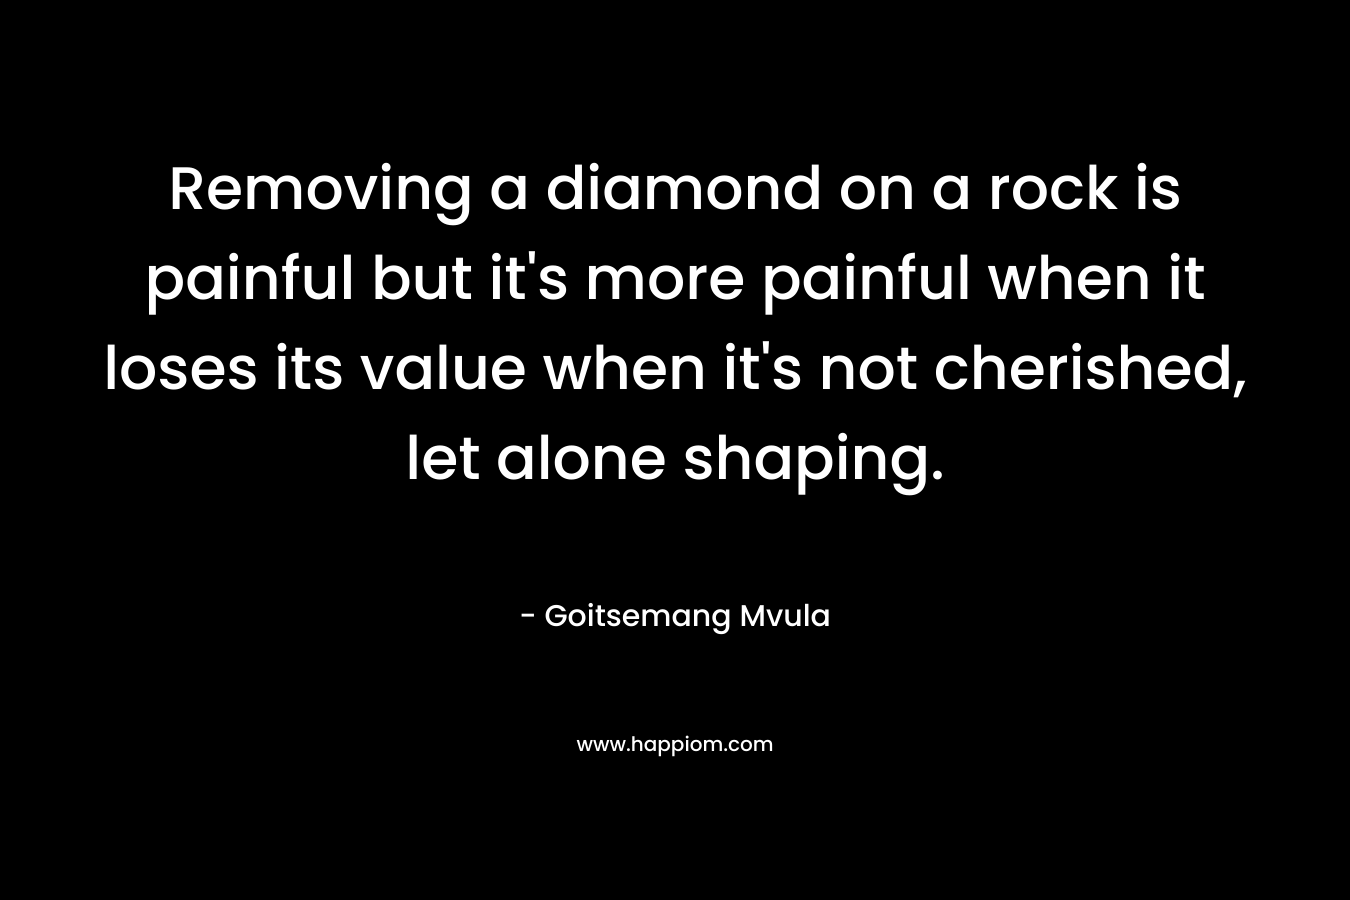 Removing a diamond on a rock is painful but it’s more painful when it loses its value when it’s not cherished, let alone shaping. – Goitsemang Mvula